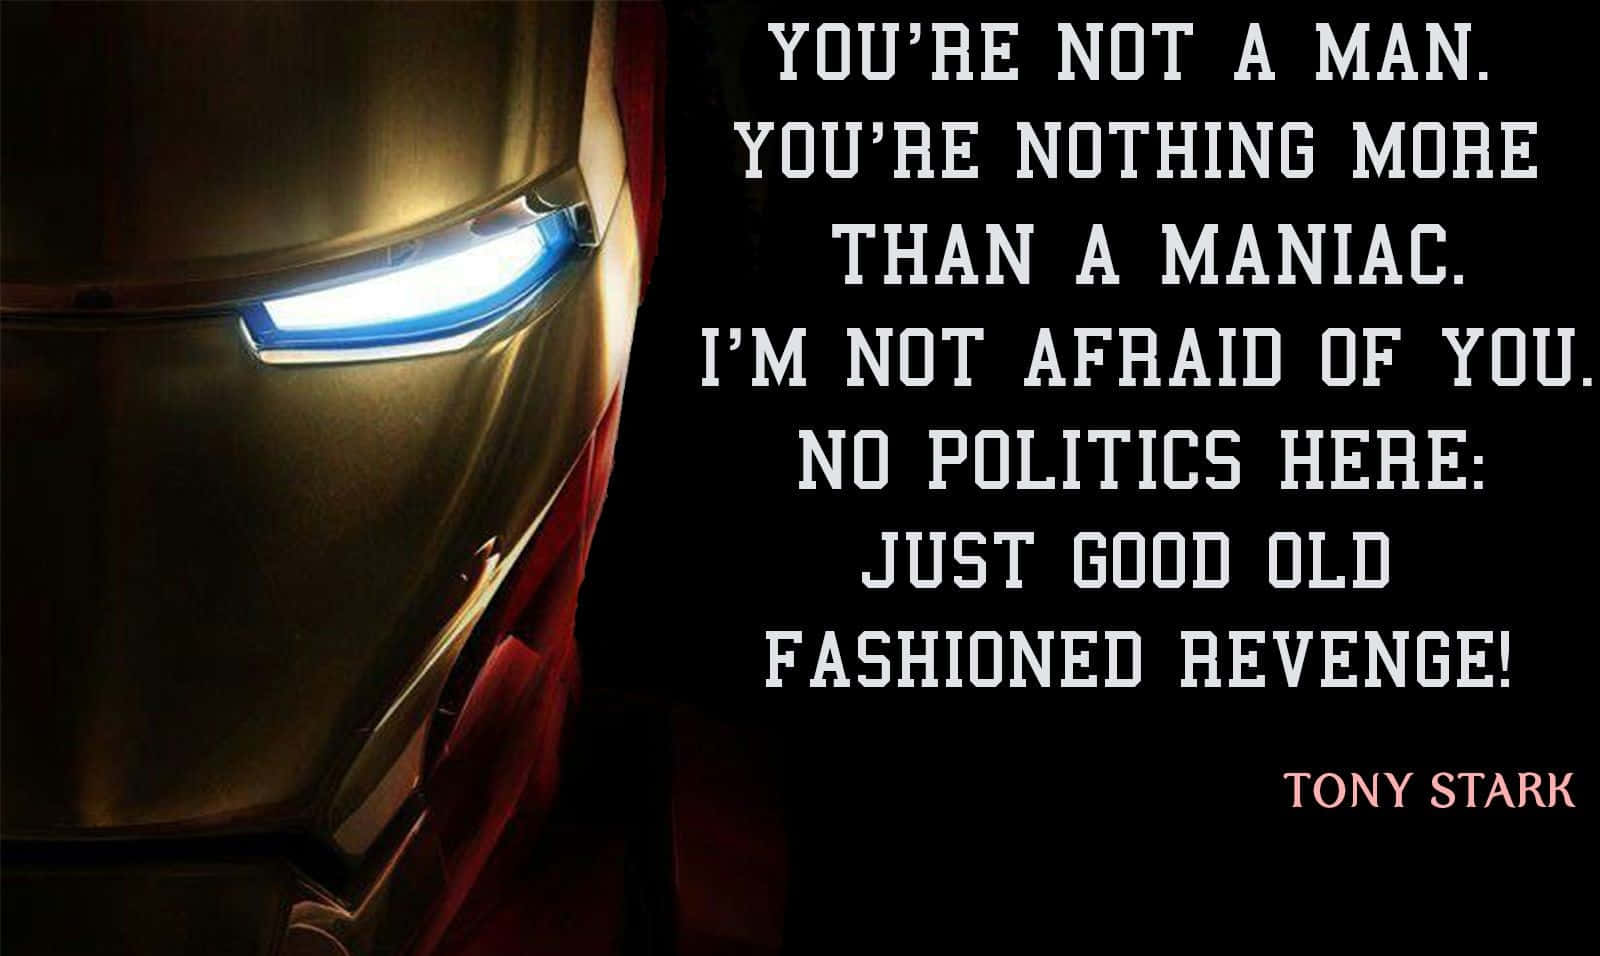 "If you're nothing without the suit, then you shouldn't have it." -Tony Stark Wallpaper